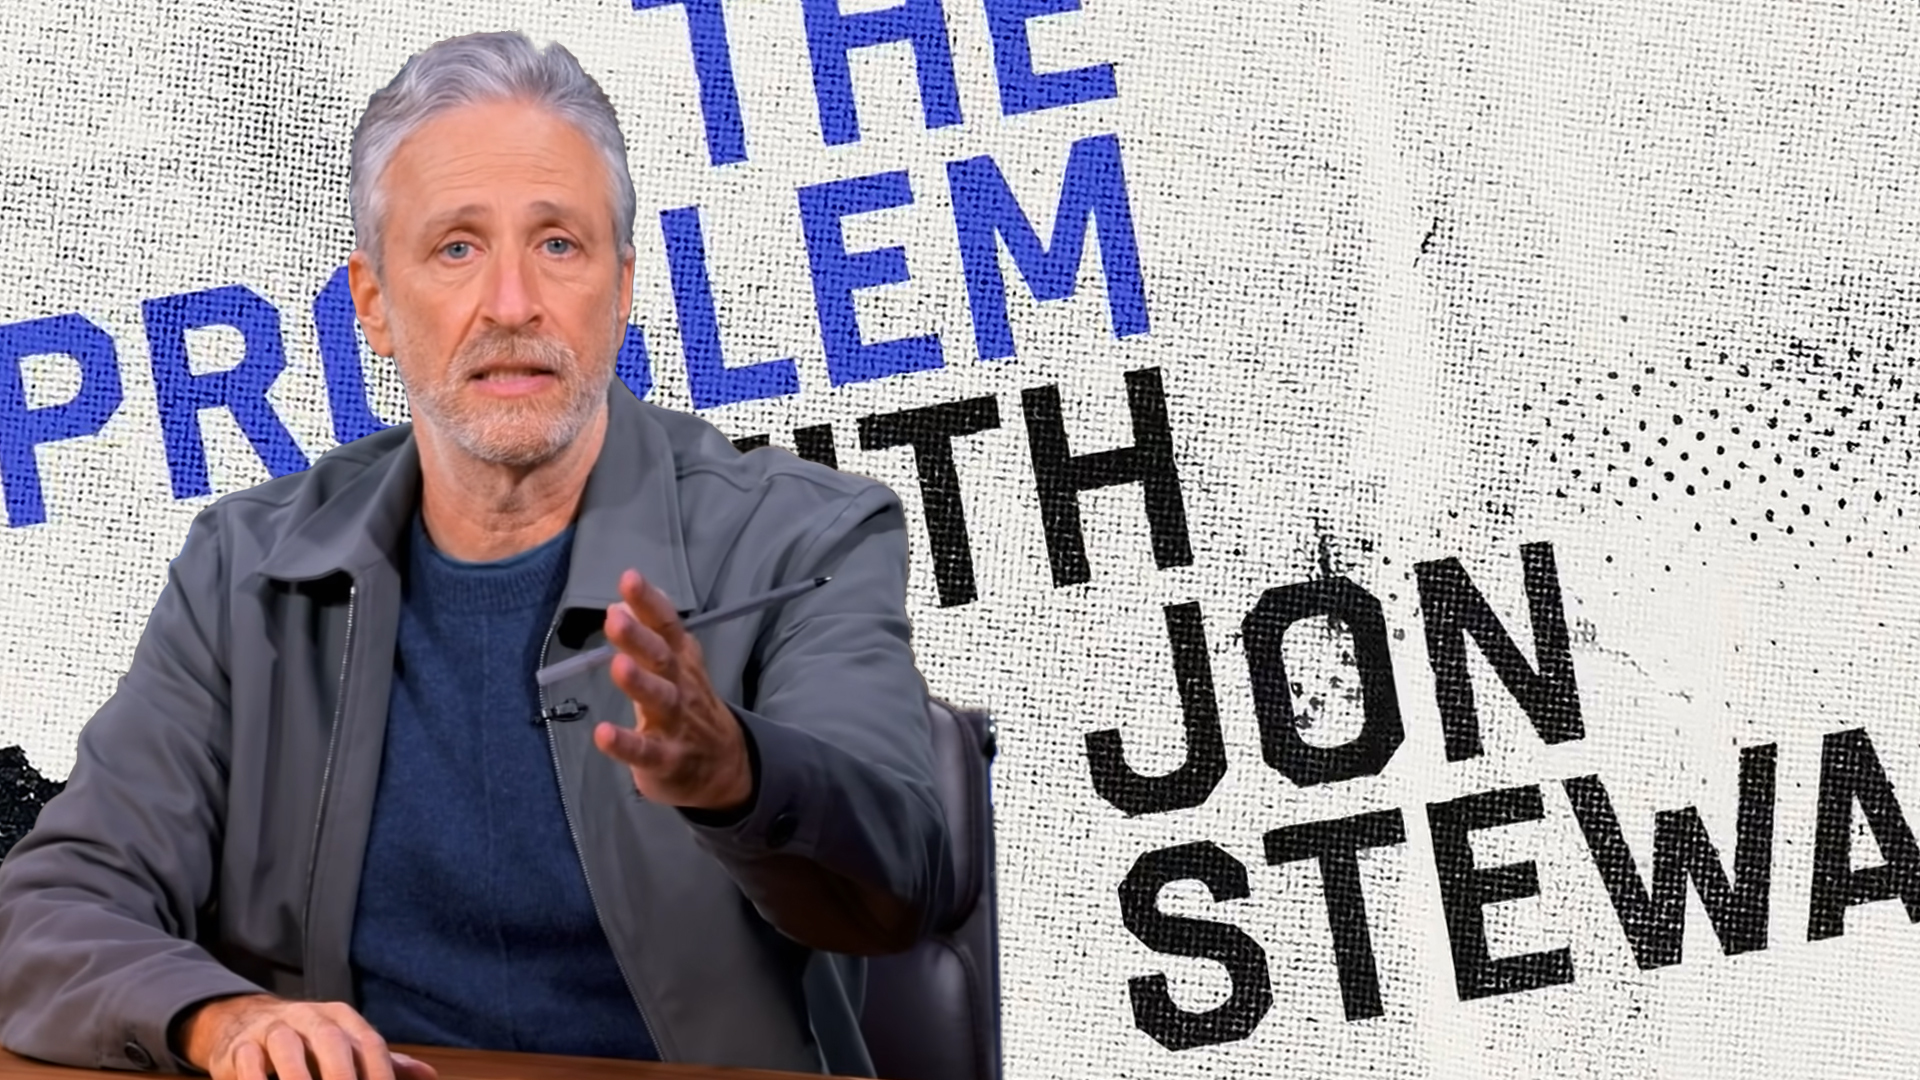 The decision came just weeks before taping was supposed to begin for the third season of "The Problem with Jon Stewart" for Apple TV+.